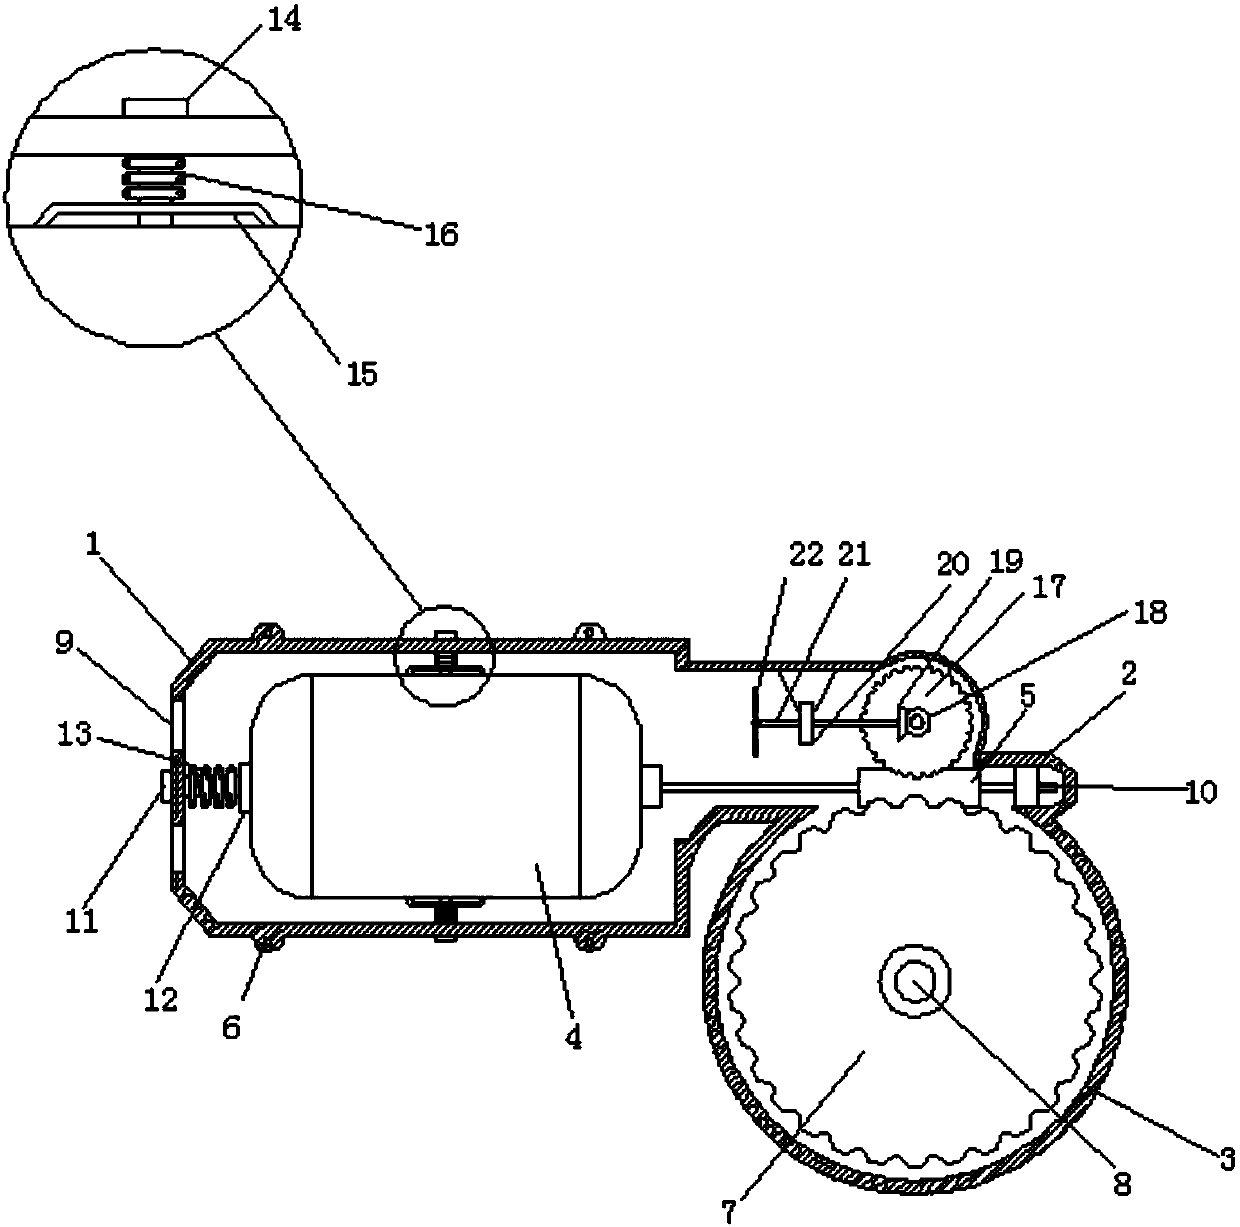 Heat dissipation machine shell apparatus used for windshield wiper motor